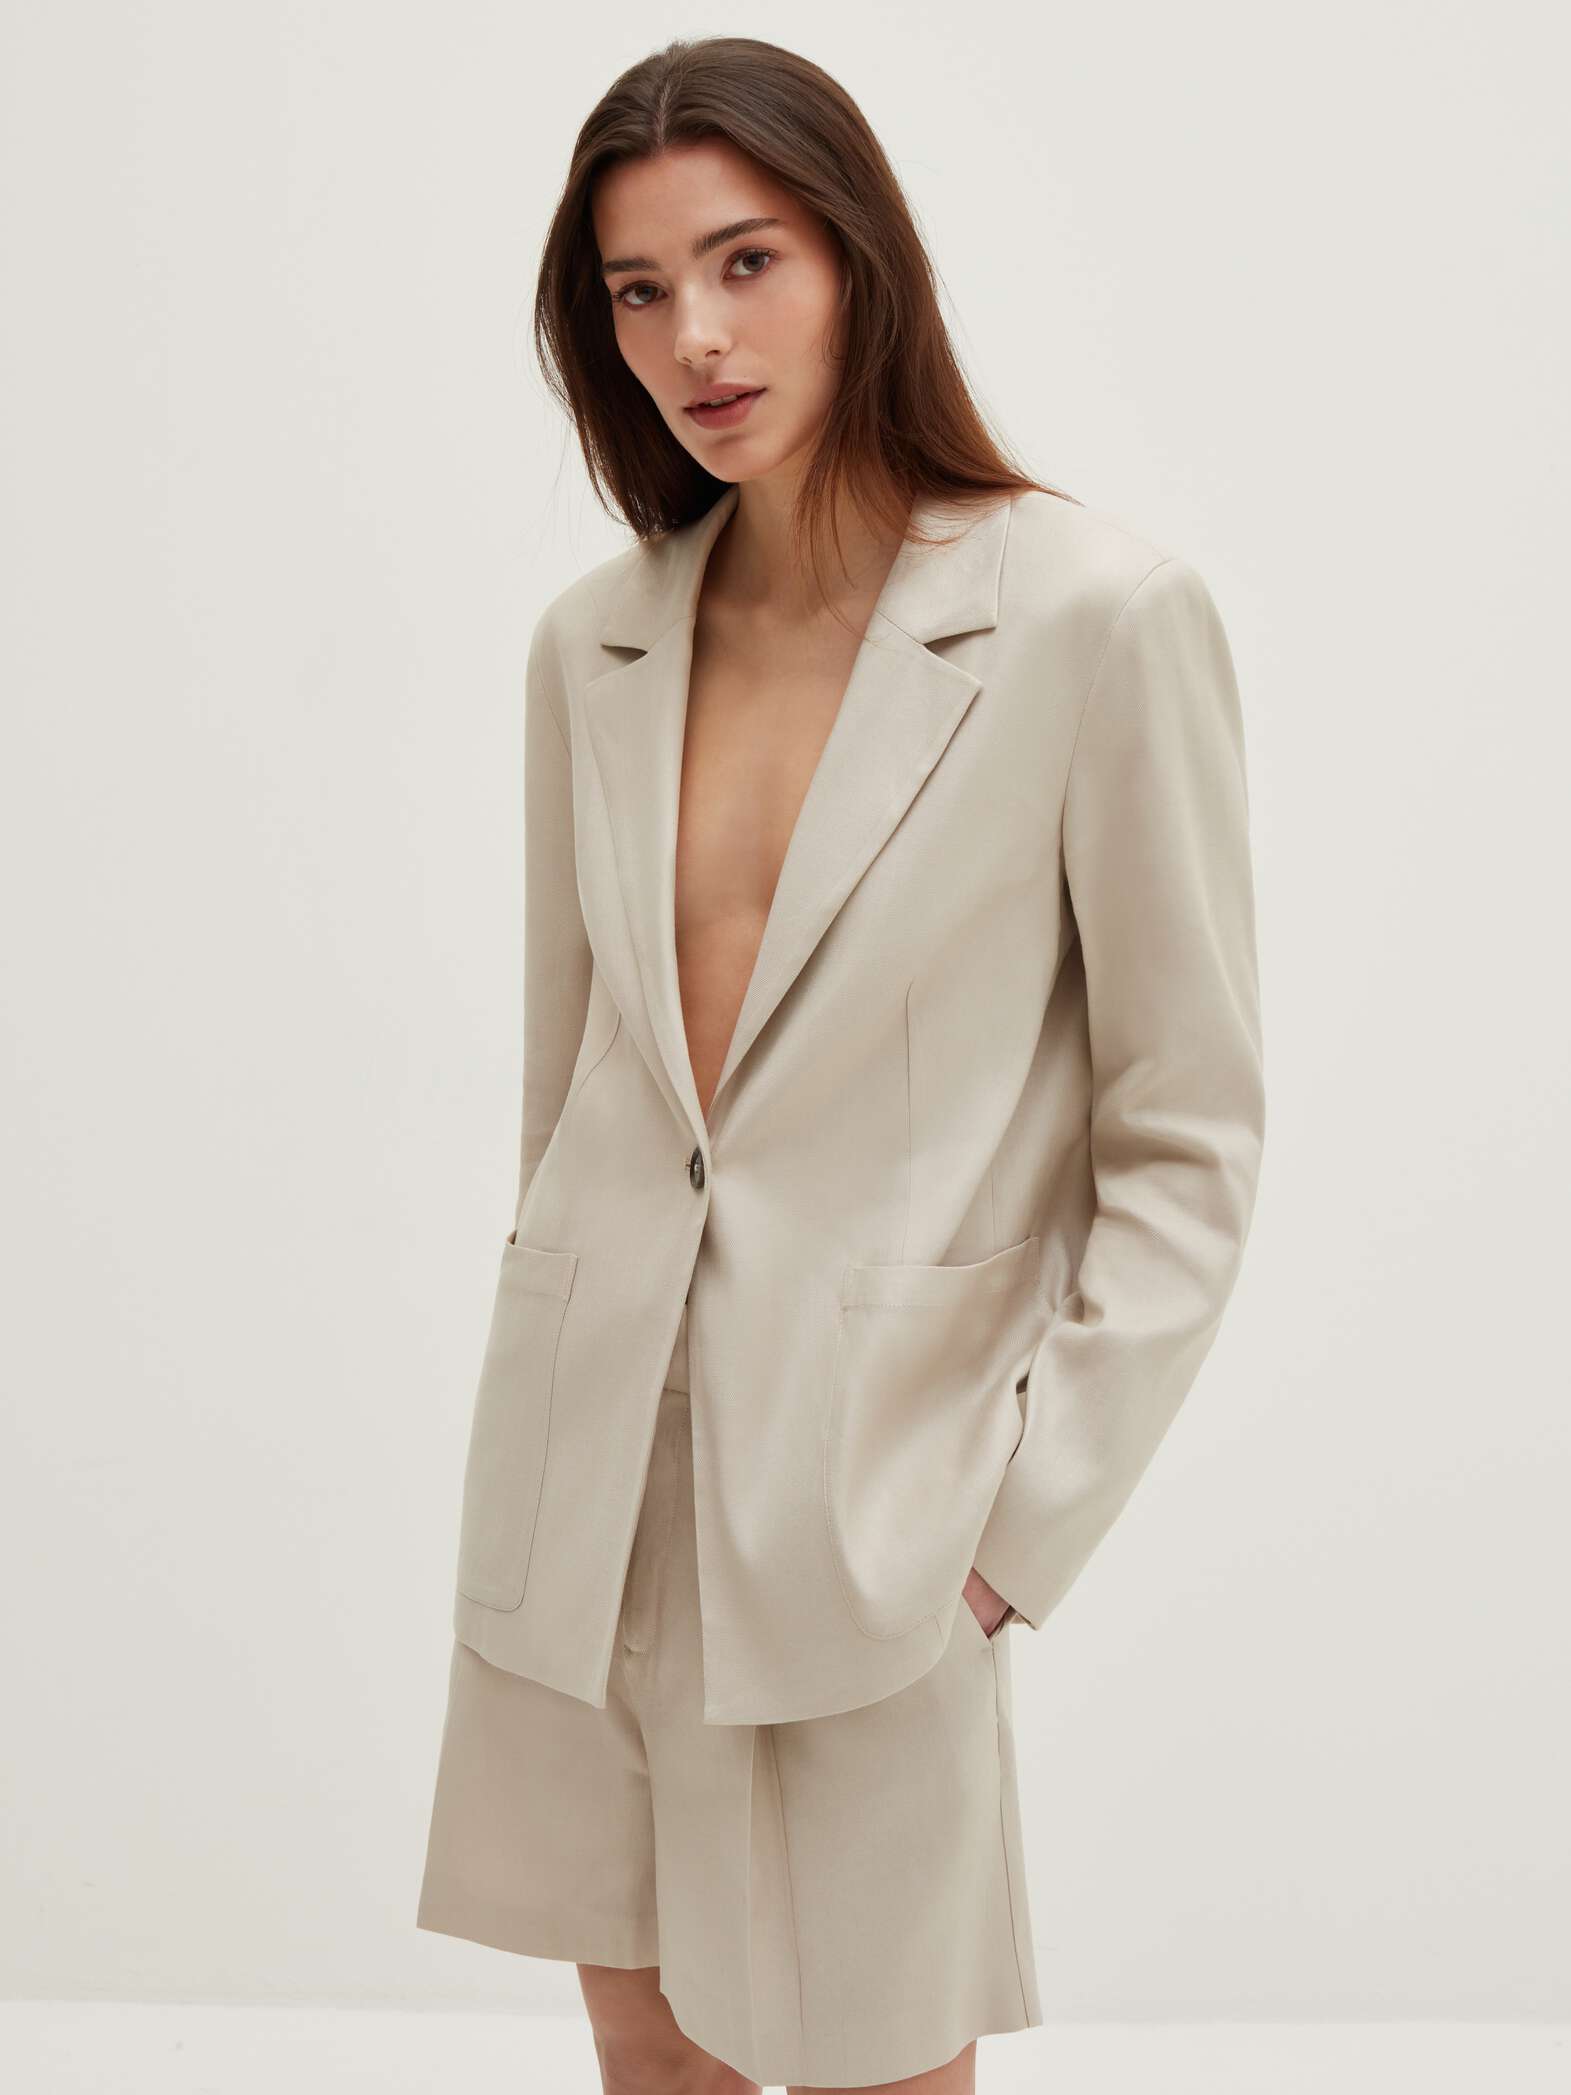 Oversized blazer in linen and viscose